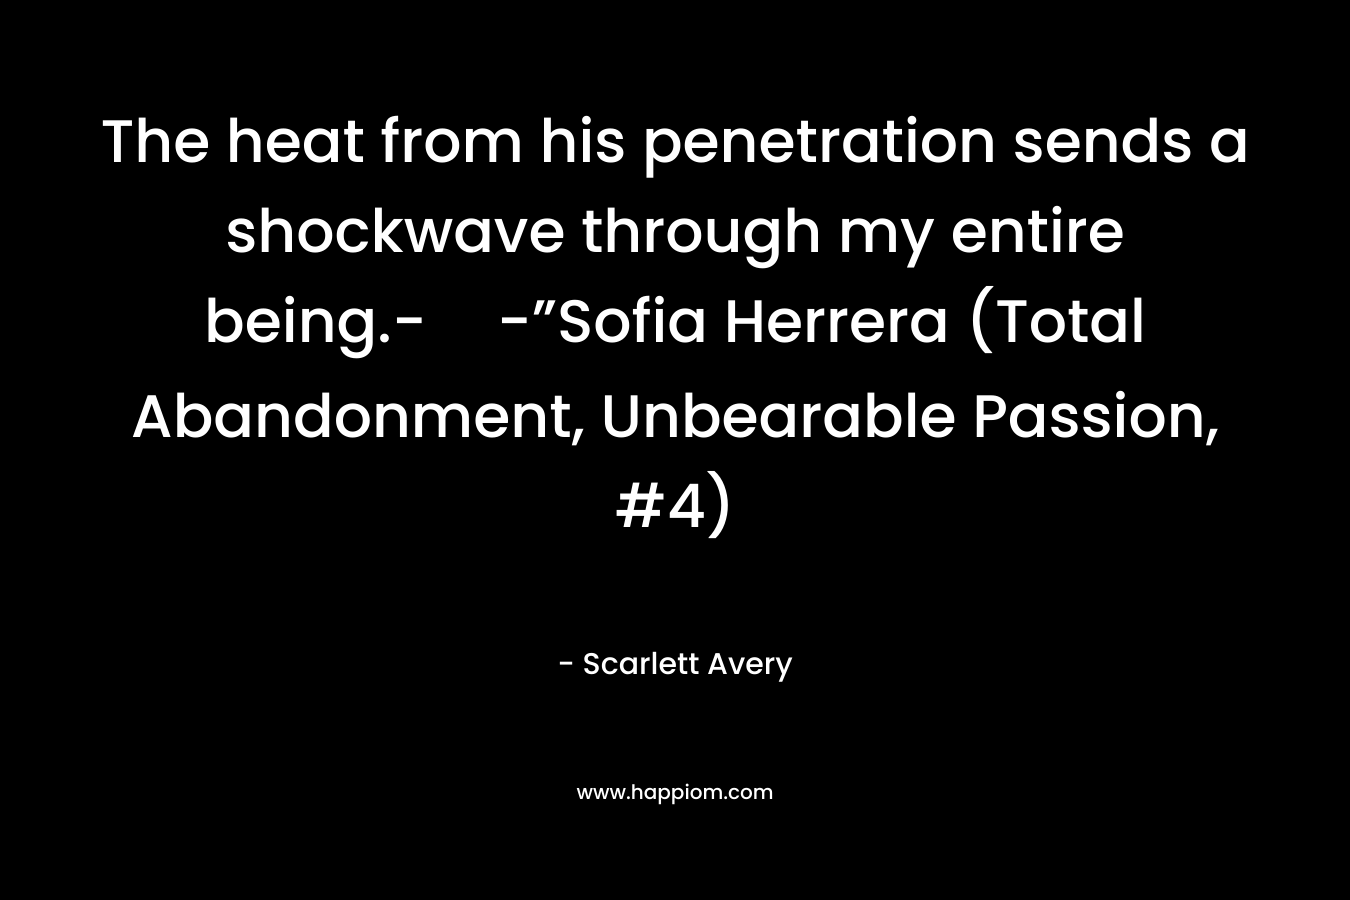 The heat from his penetration sends a shockwave through my entire being.--”Sofia Herrera (Total Abandonment, Unbearable Passion, #4) – Scarlett Avery